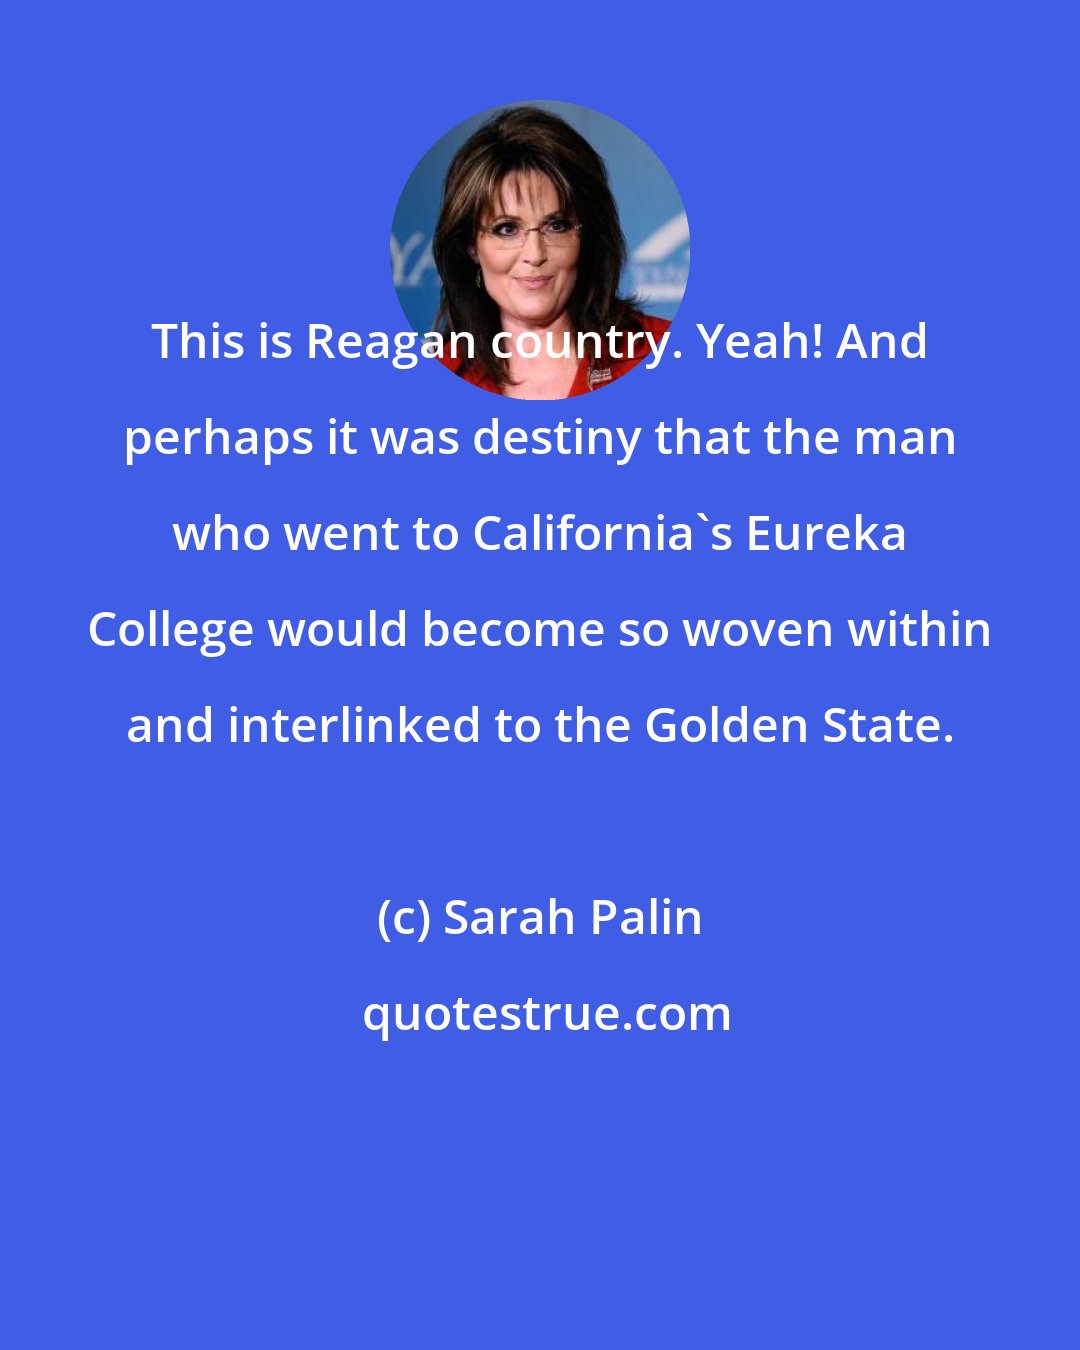 Sarah Palin: This is Reagan country. Yeah! And perhaps it was destiny that the man who went to California`s Eureka College would become so woven within and interlinked to the Golden State.